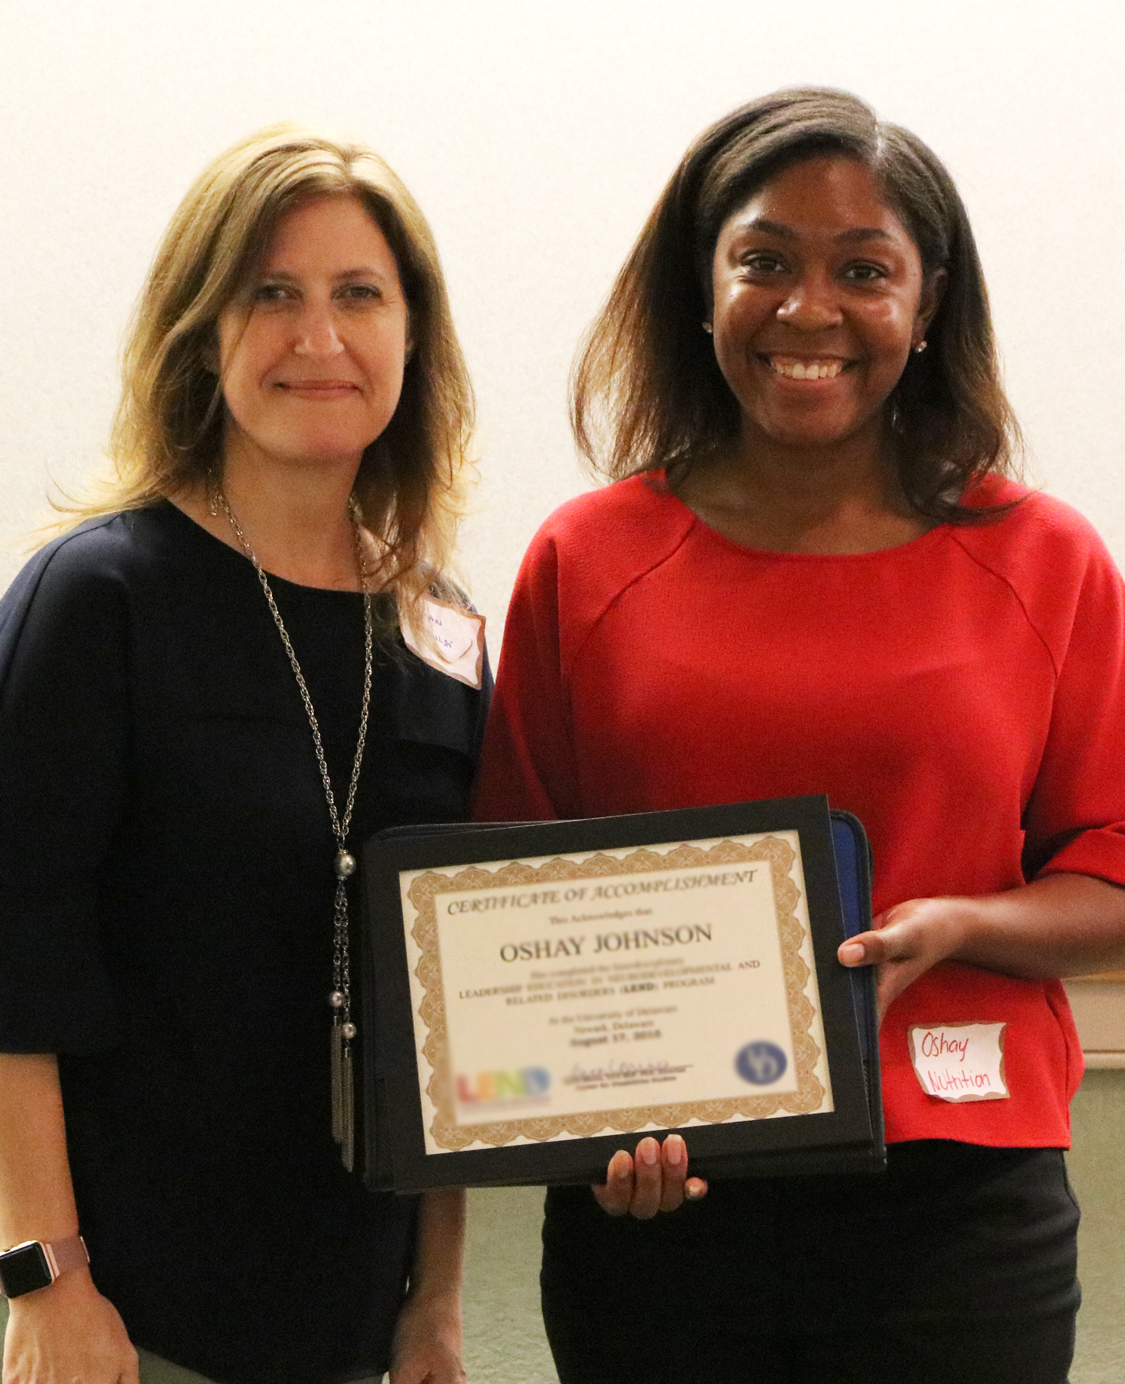 A middle age white woman stands next to a young woman of color, her student. The young woman is holding a certificate. Both smile.